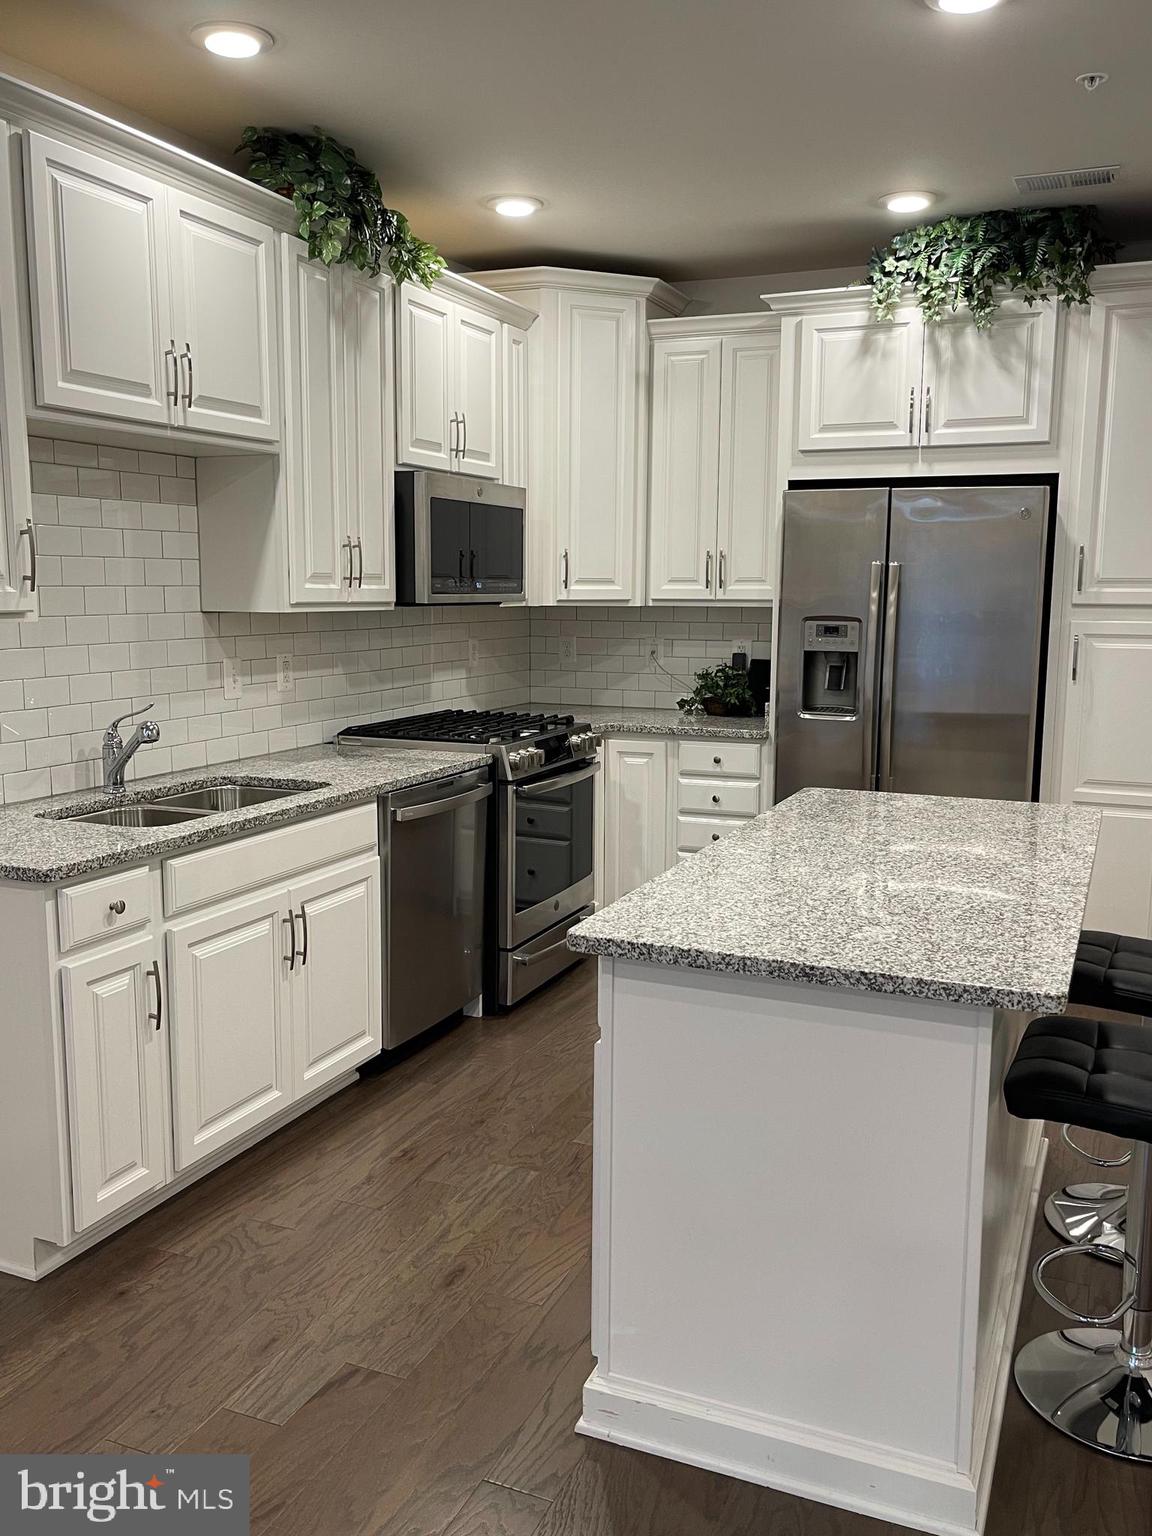 a kitchen with stainless steel appliances granite countertop a sink stove microwave and cabinets